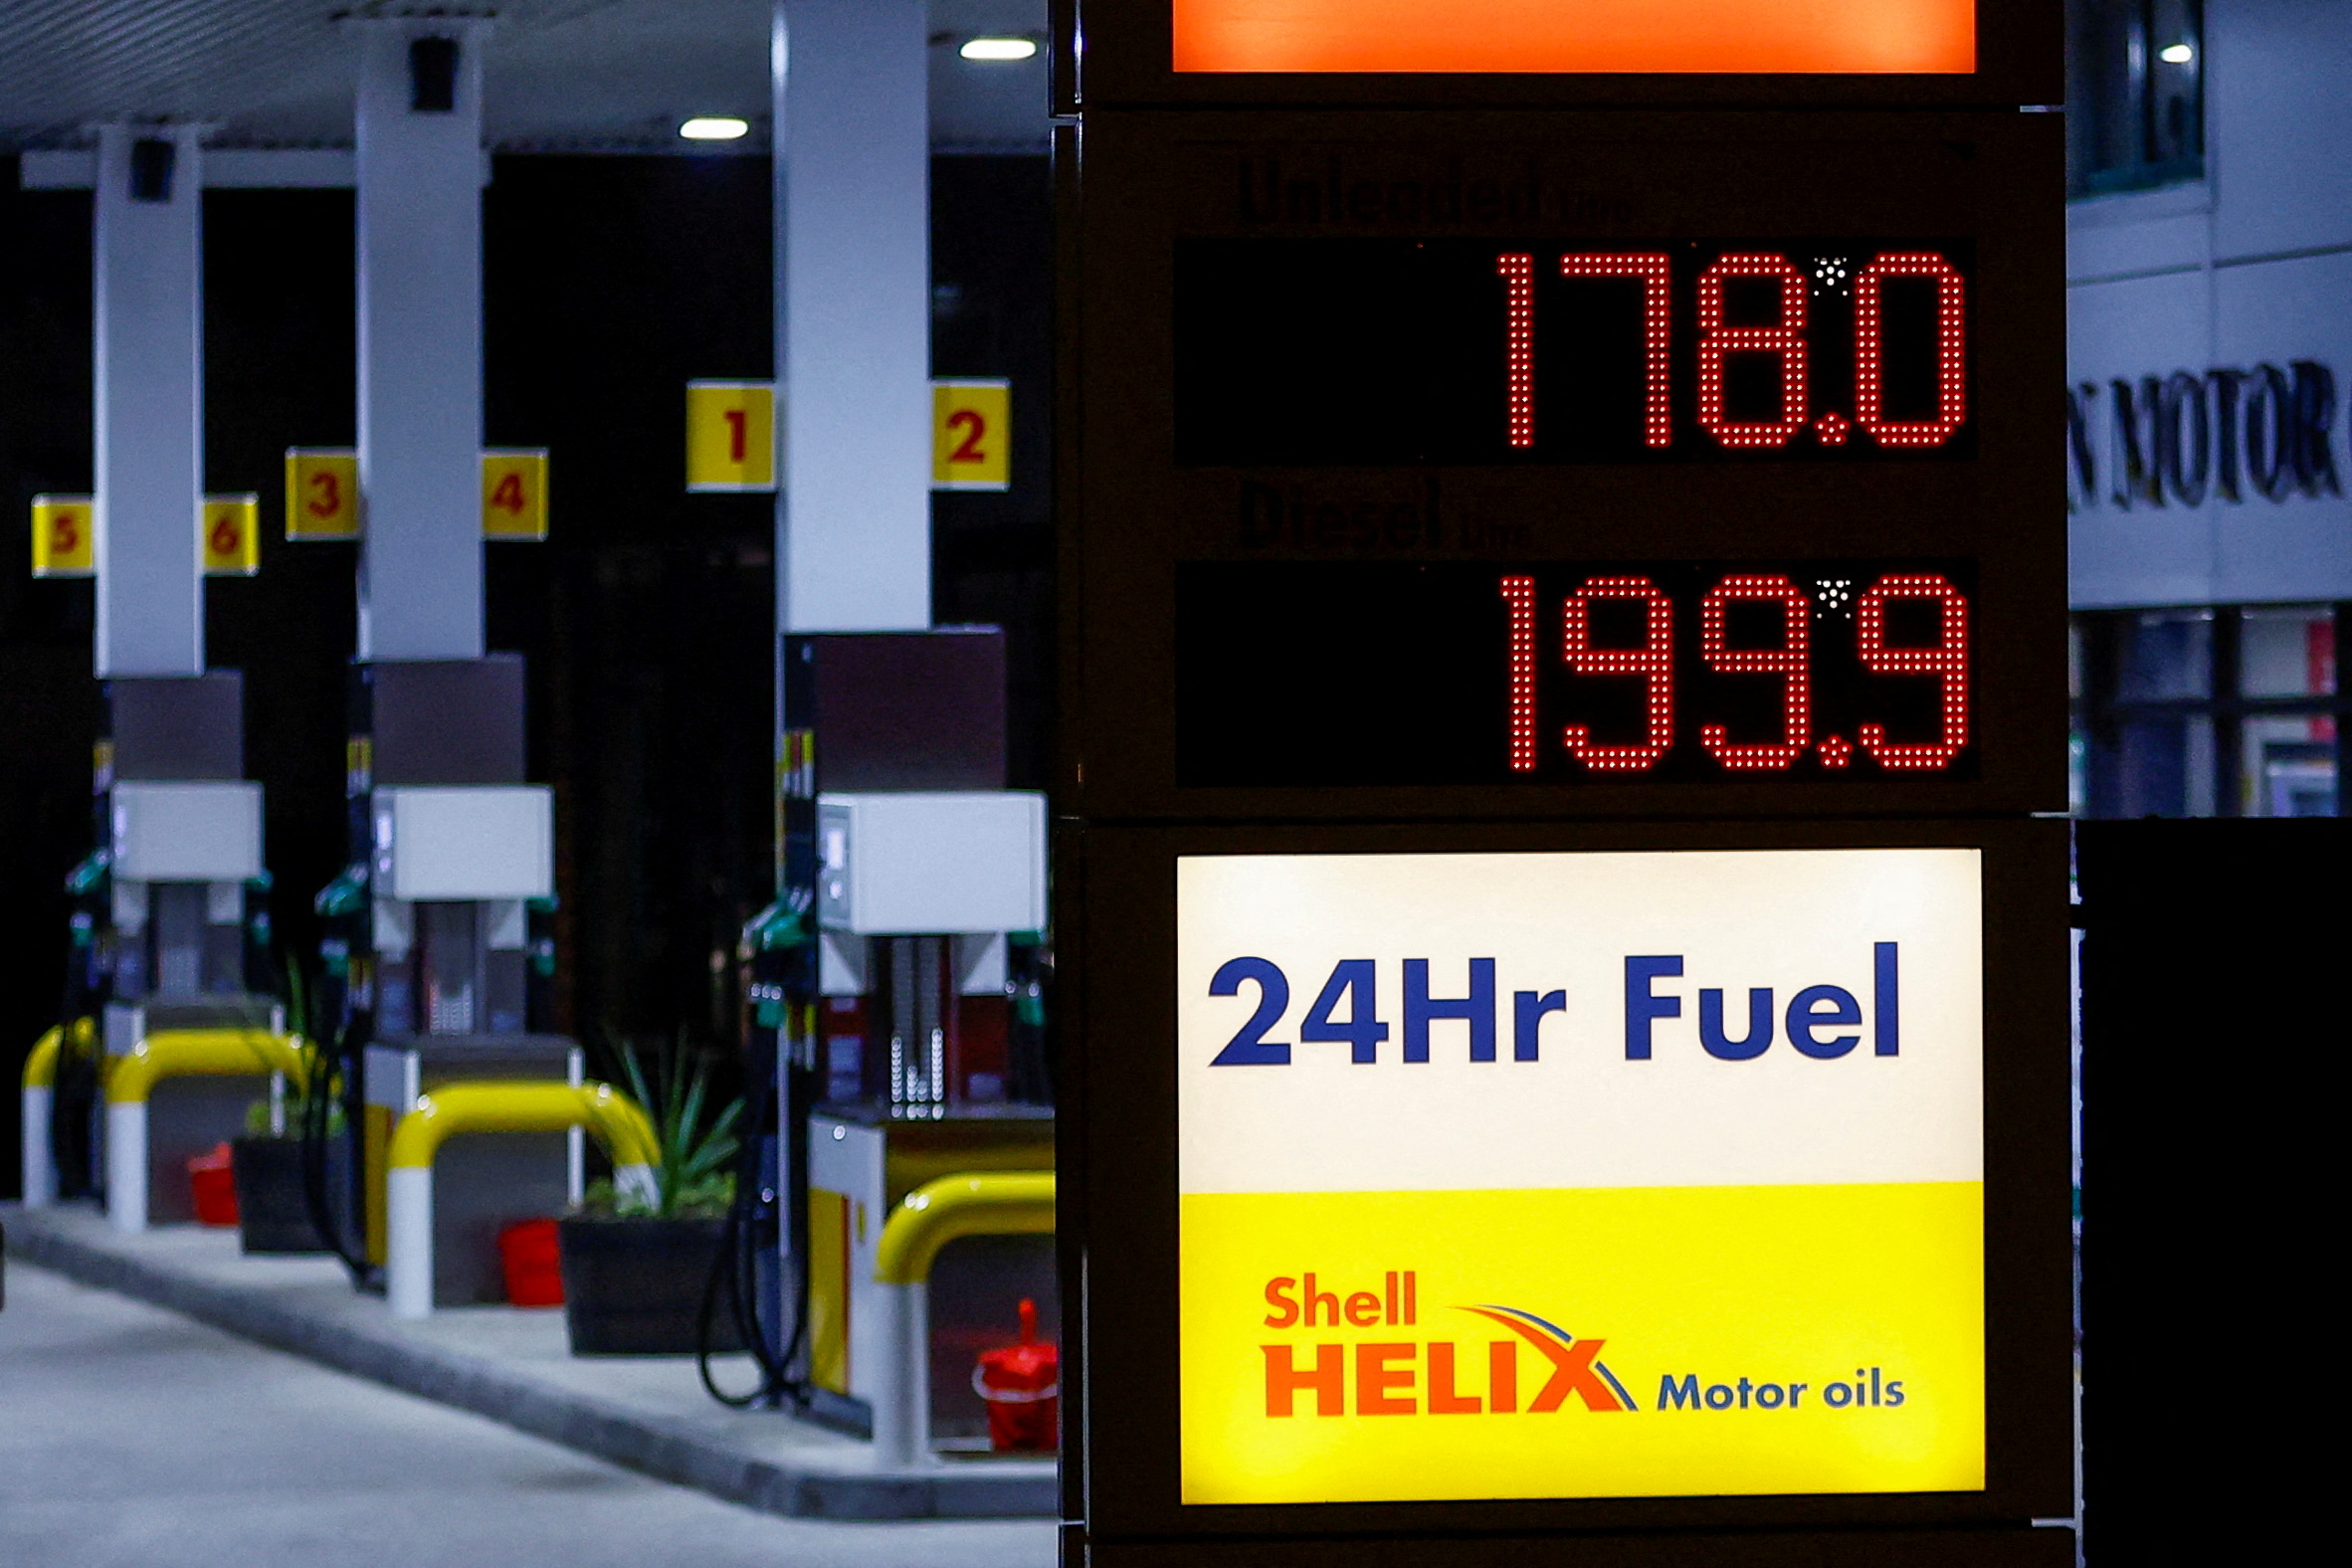 Increased fuel prices are displayed at a filling station as Russia's invasion of Ukraine continues, in Long Stratton